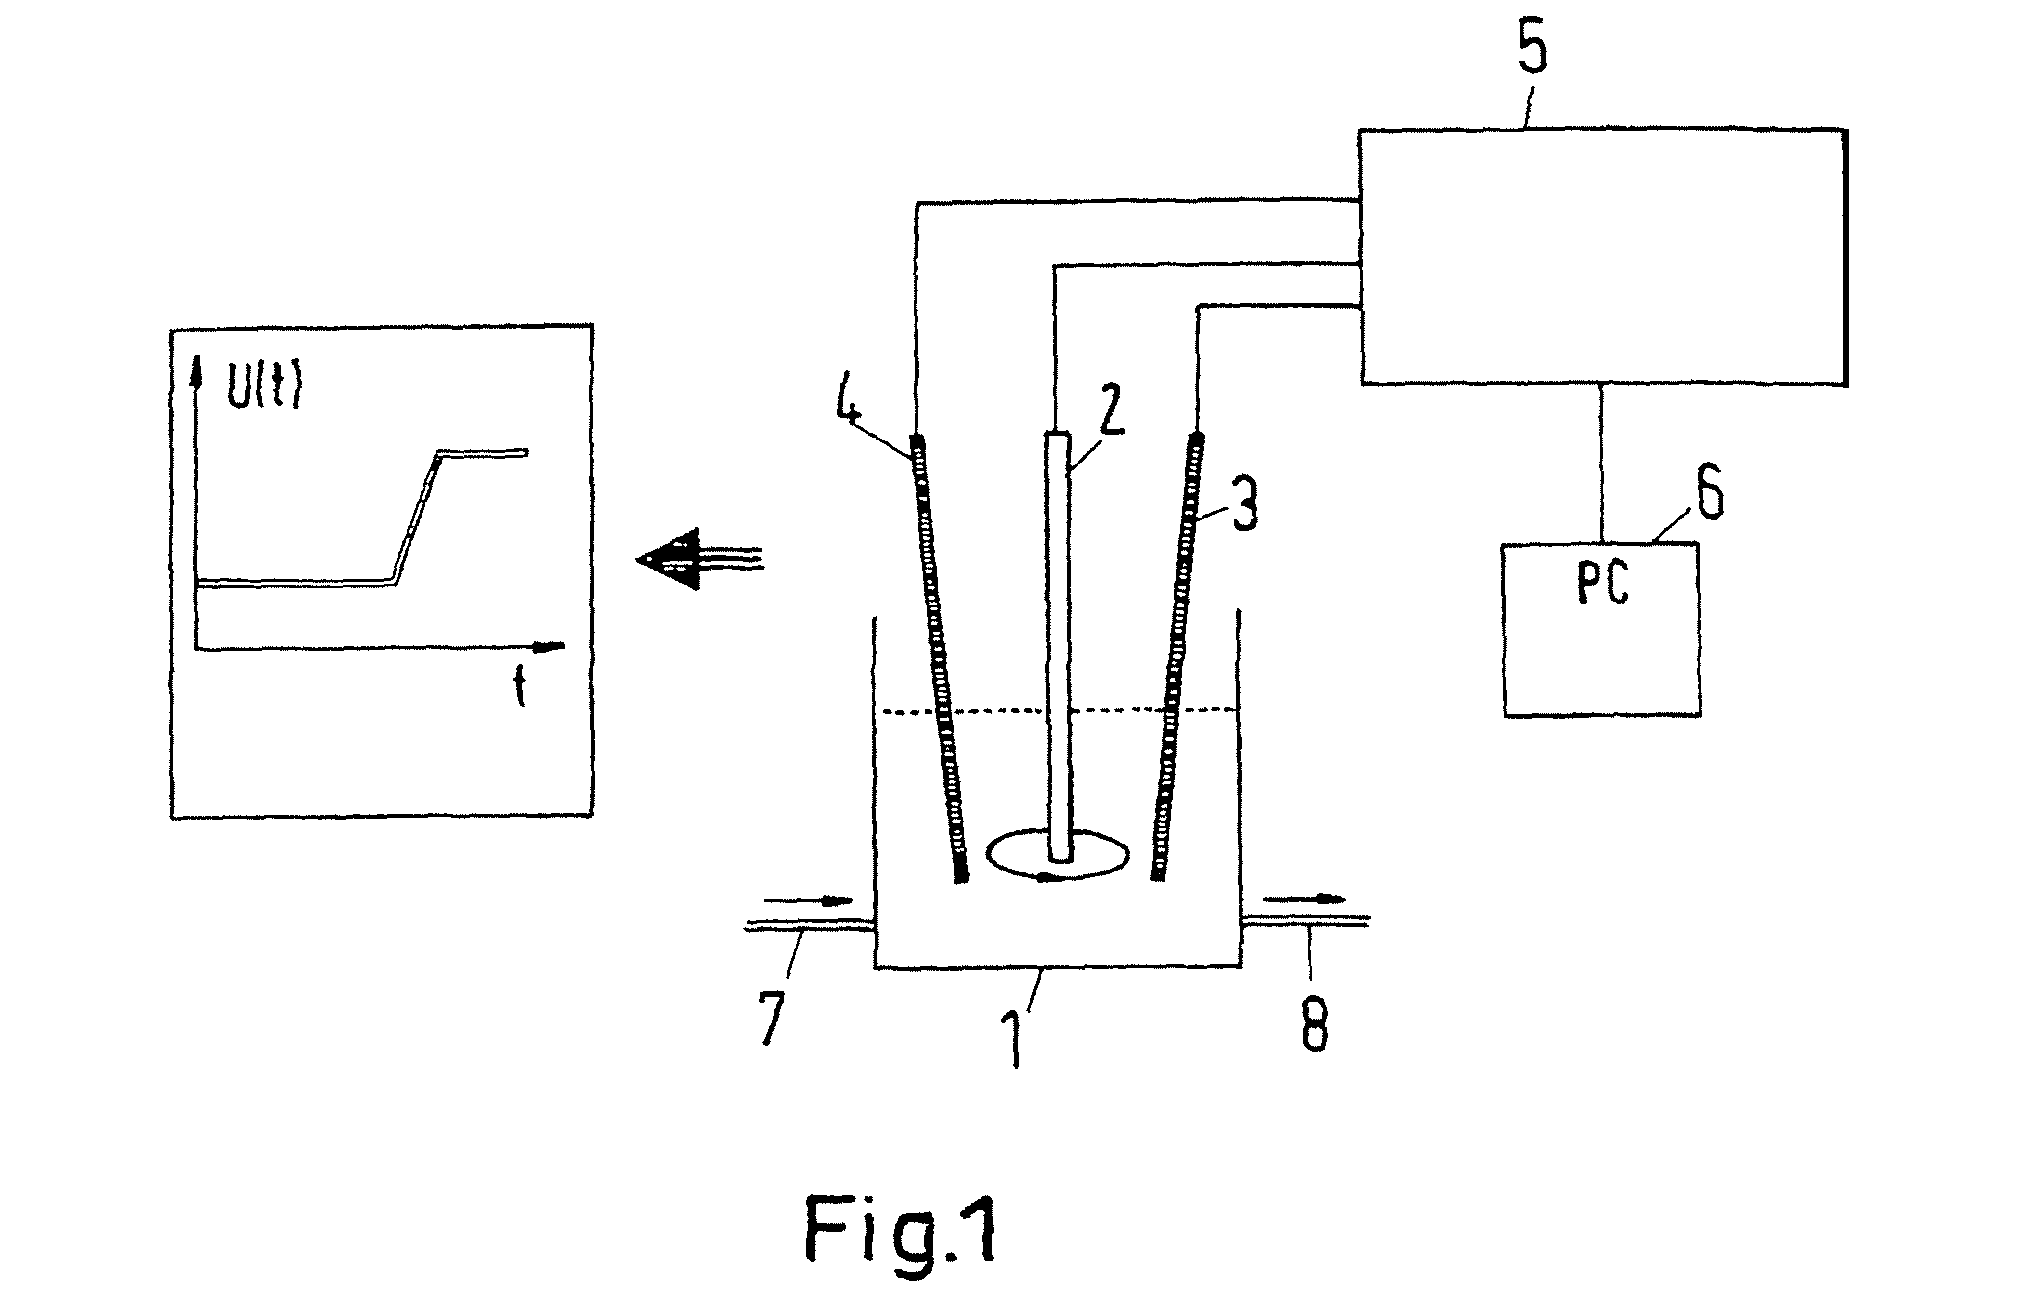 Method of inspecting a metal coating and a method for analytical control of a deposition electrolyte serving to deposit said metal coating